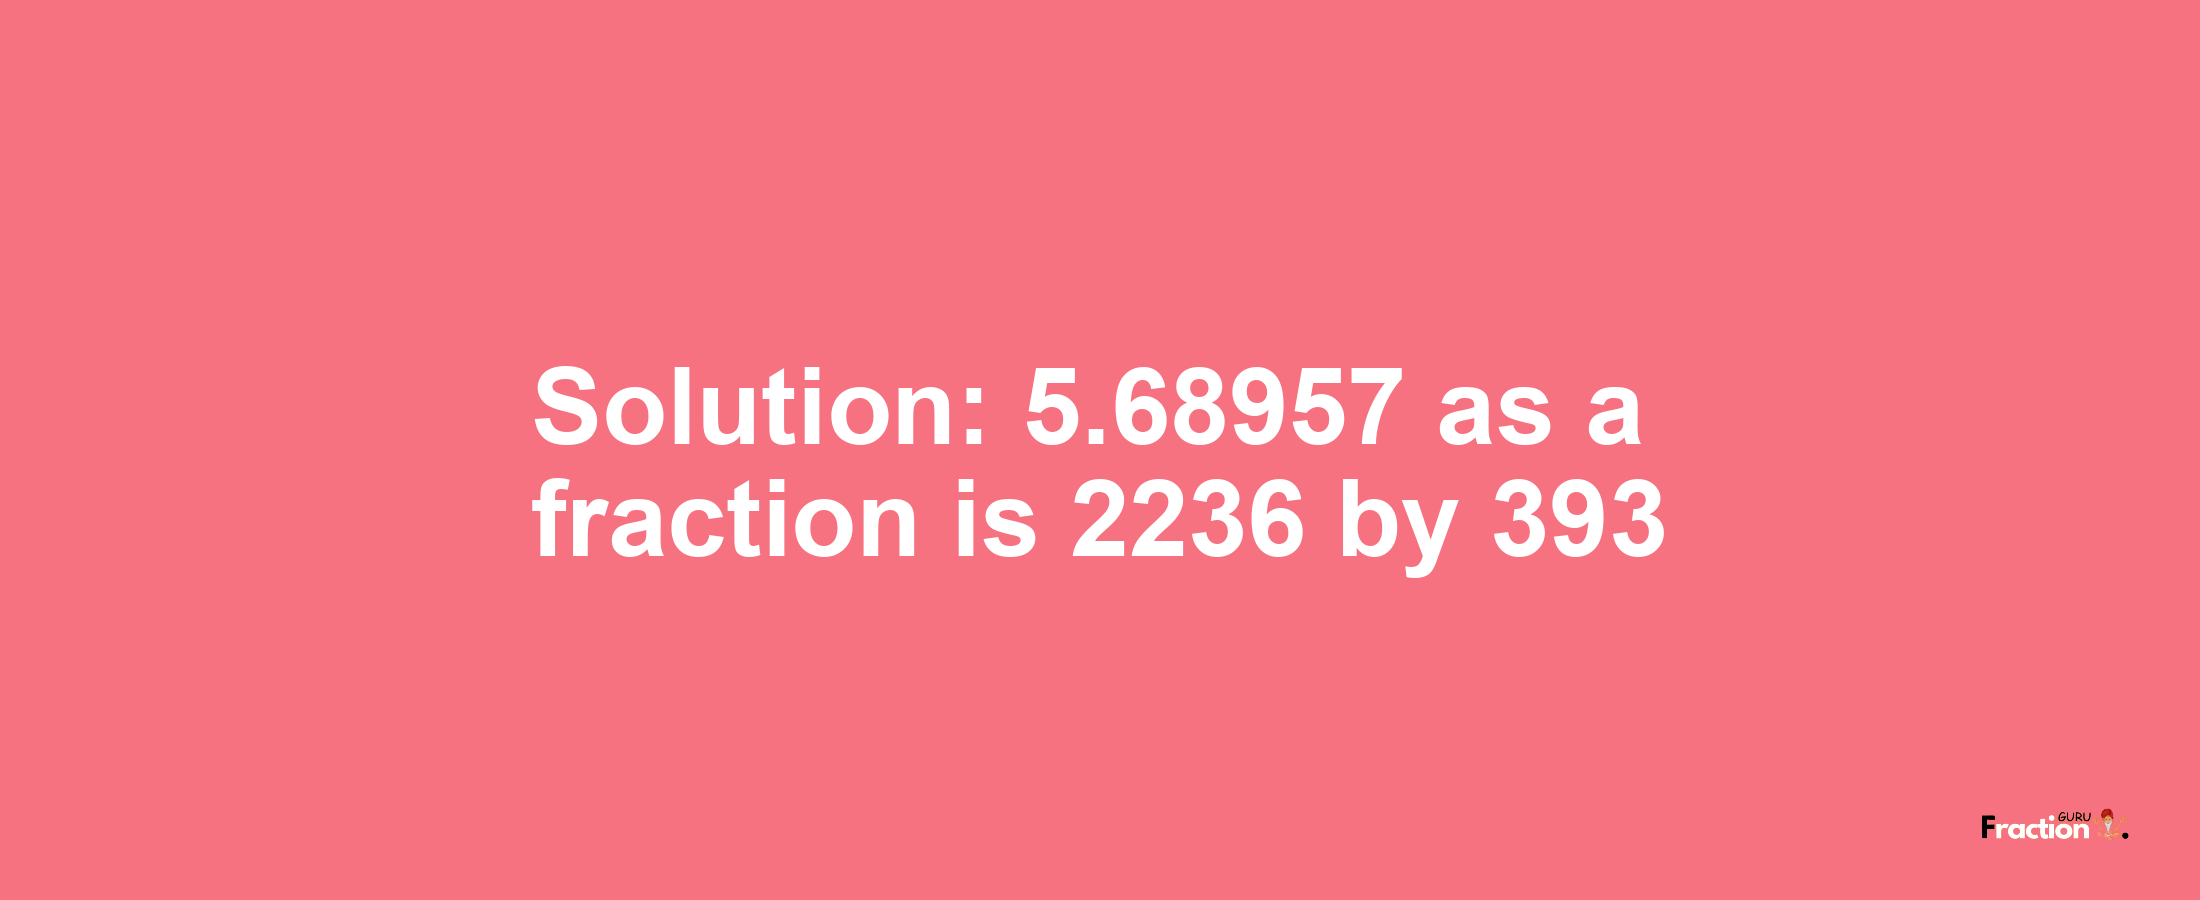 Solution:5.68957 as a fraction is 2236/393